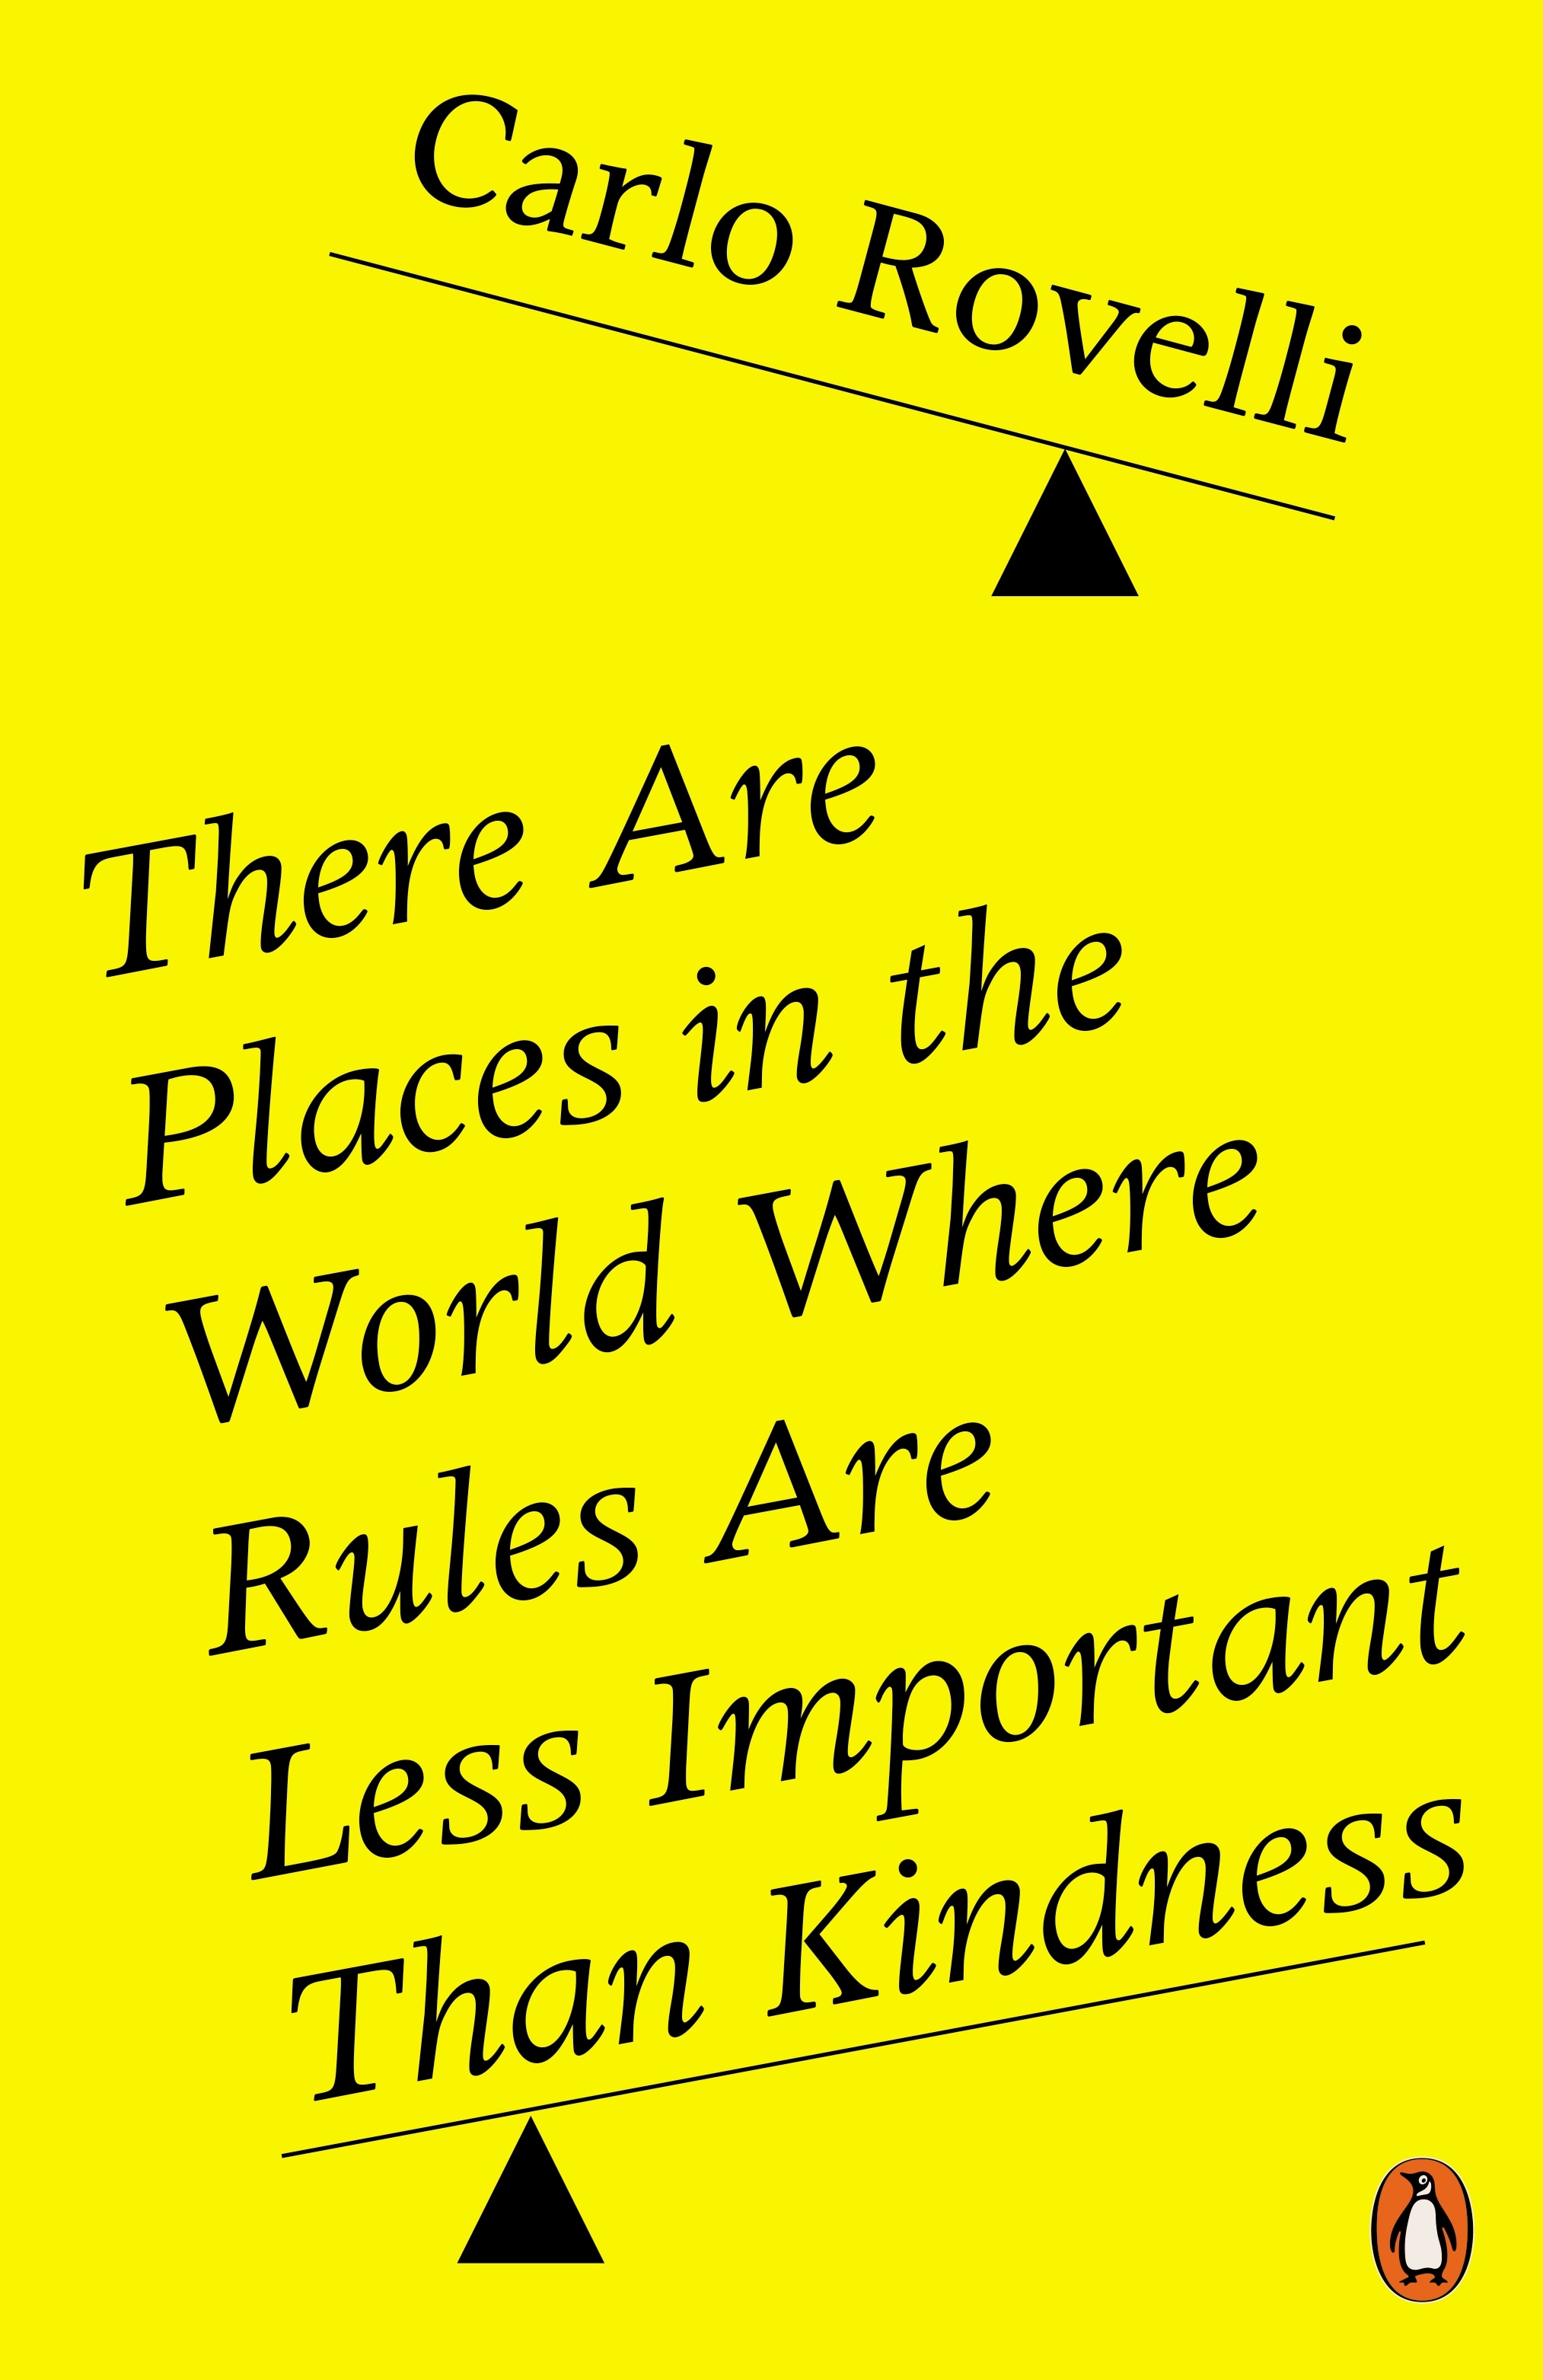 Book “There Are Places in the World Where Rules Are Less Important Than Kindness” by Carlo Rovelli — September 1, 2022